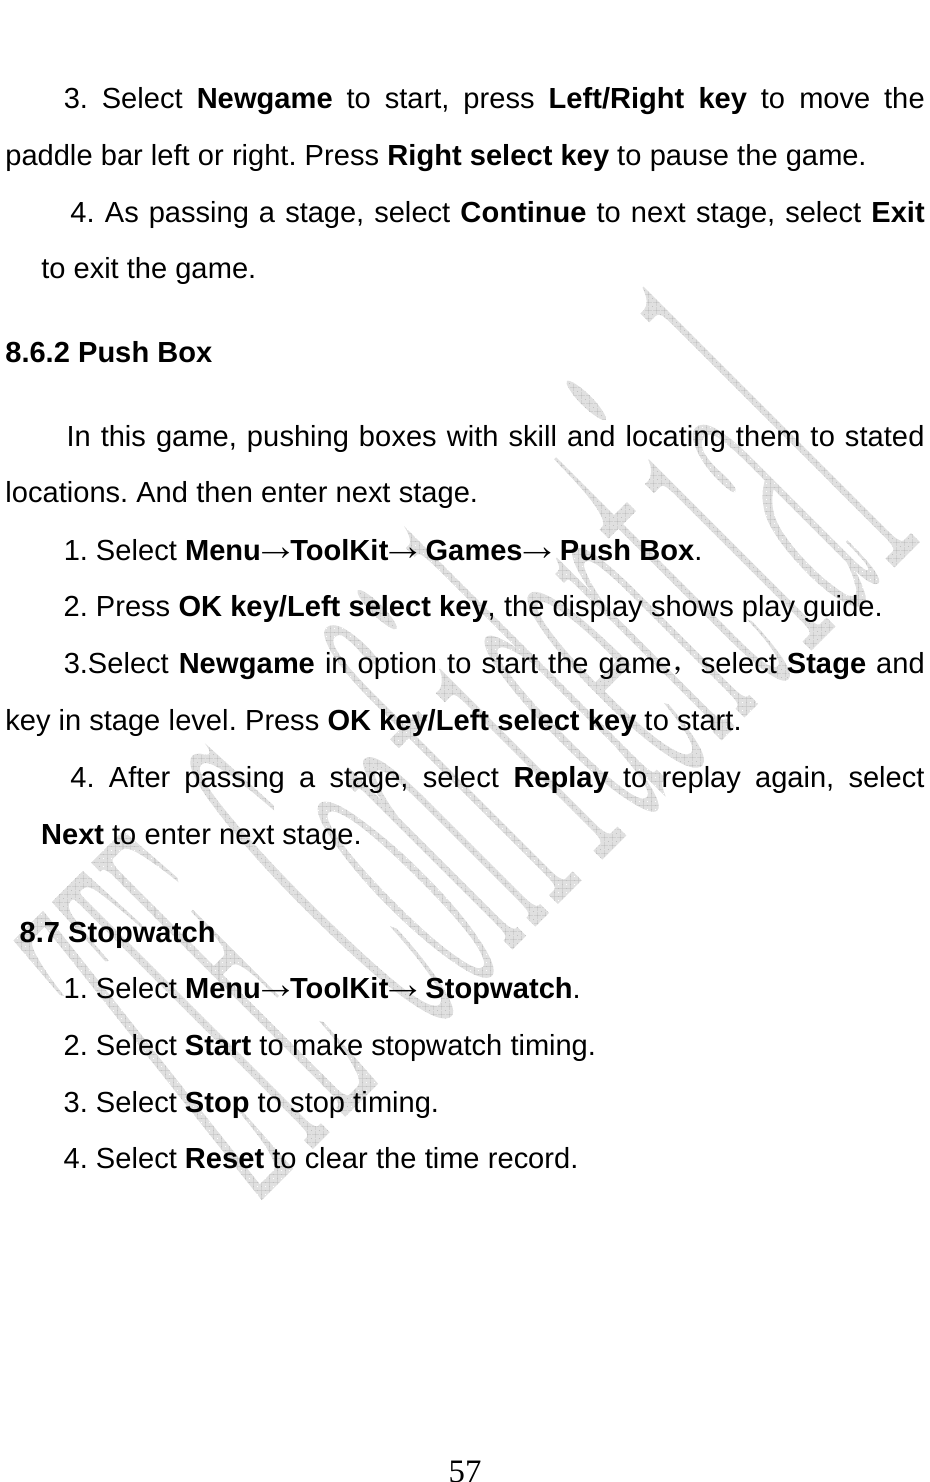                              573. Select Newgame to start, press Left/Right key to move the paddle bar left or right. Press Right select key to pause the game. 4. As passing a stage, select Continue to next stage, select Exit to exit the game. 8.6.2 Push Box In this game, pushing boxes with skill and locating them to stated locations. And then enter next stage. 1. Select Menu→ToolKit→ Games→ Push Box. 2. Press OK key/Left select key, the display shows play guide. 3.Select Newgame in option to start the game，select Stage and key in stage level. Press OK key/Left select key to start. 4. After passing a stage, select Replay to replay again, select Next to enter next stage. 8.7 Stopwatch 1. Select Menu→ToolKit→ Stopwatch. 2. Select Start to make stopwatch timing. 3. Select Stop to stop timing. 4. Select Reset to clear the time record.    